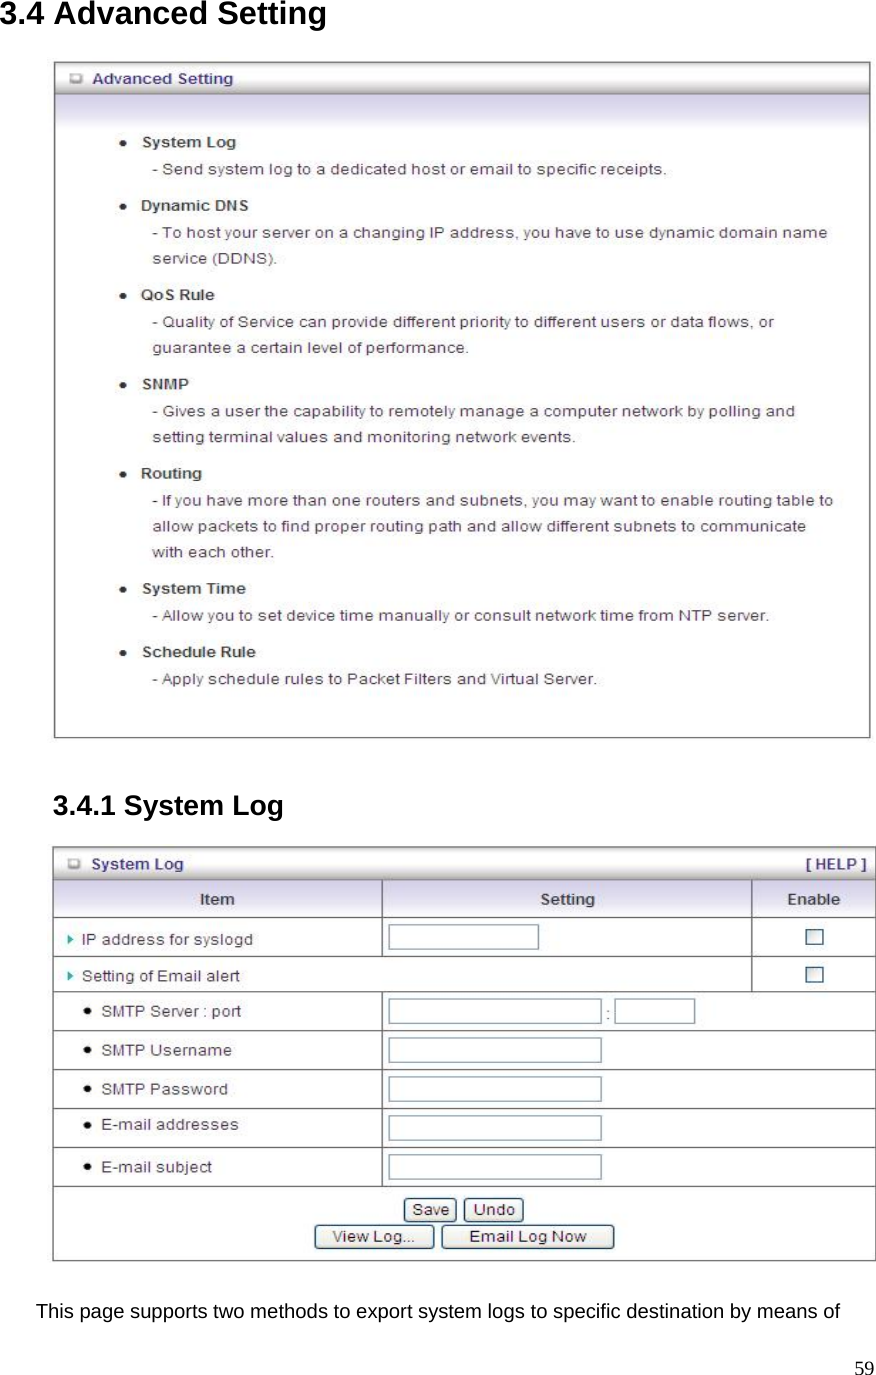  593.4 Advanced Setting     3.4.1 System Log    This page supports two methods to export system logs to specific destination by means of 